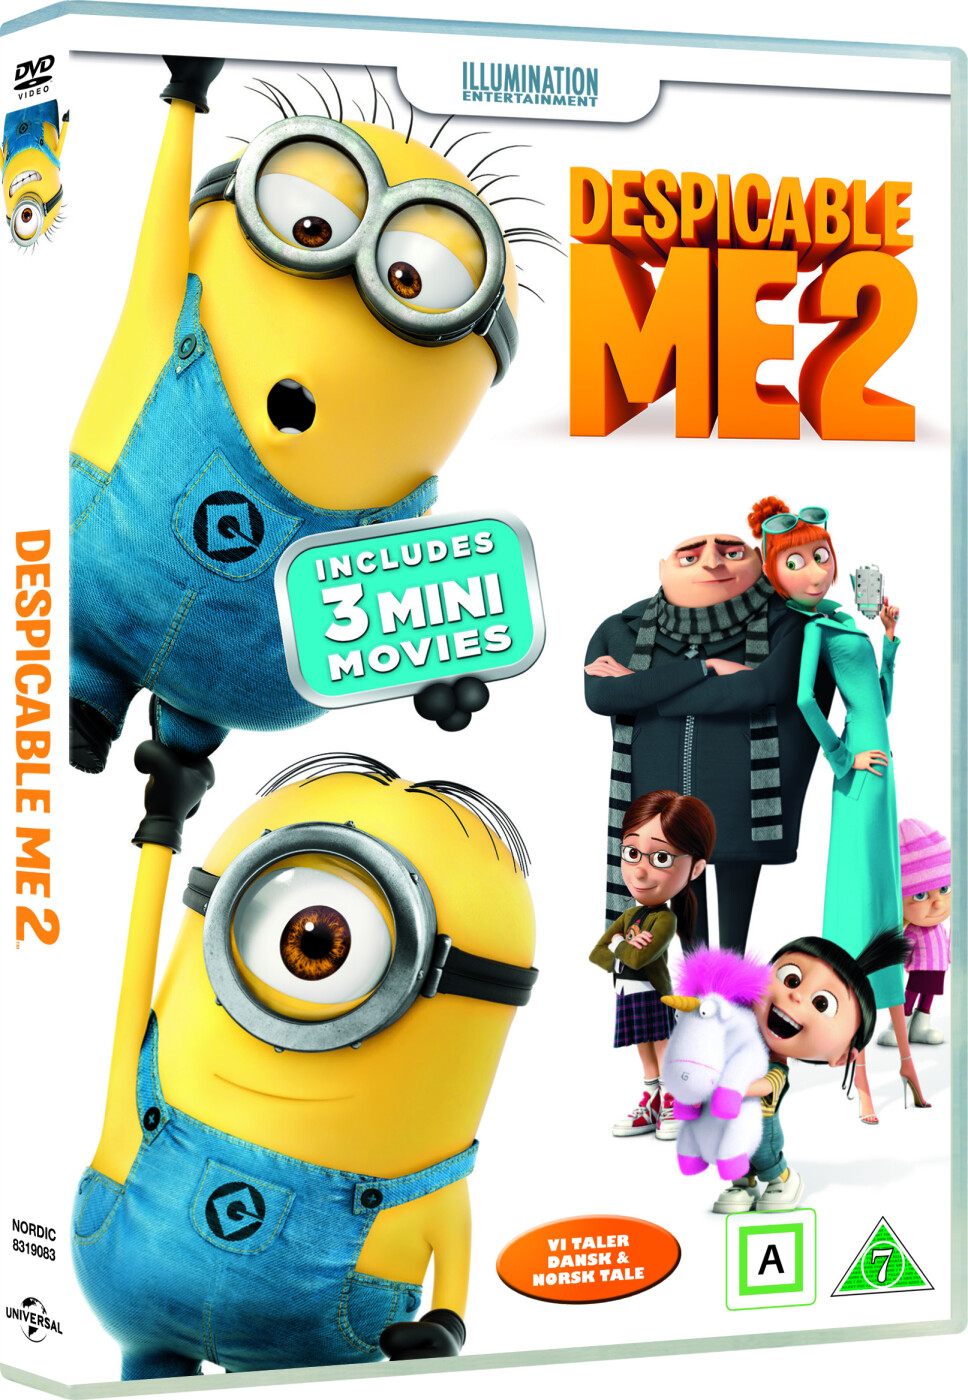 Grusomme Mig 2 / Despicable Me 2 - DVD - Film